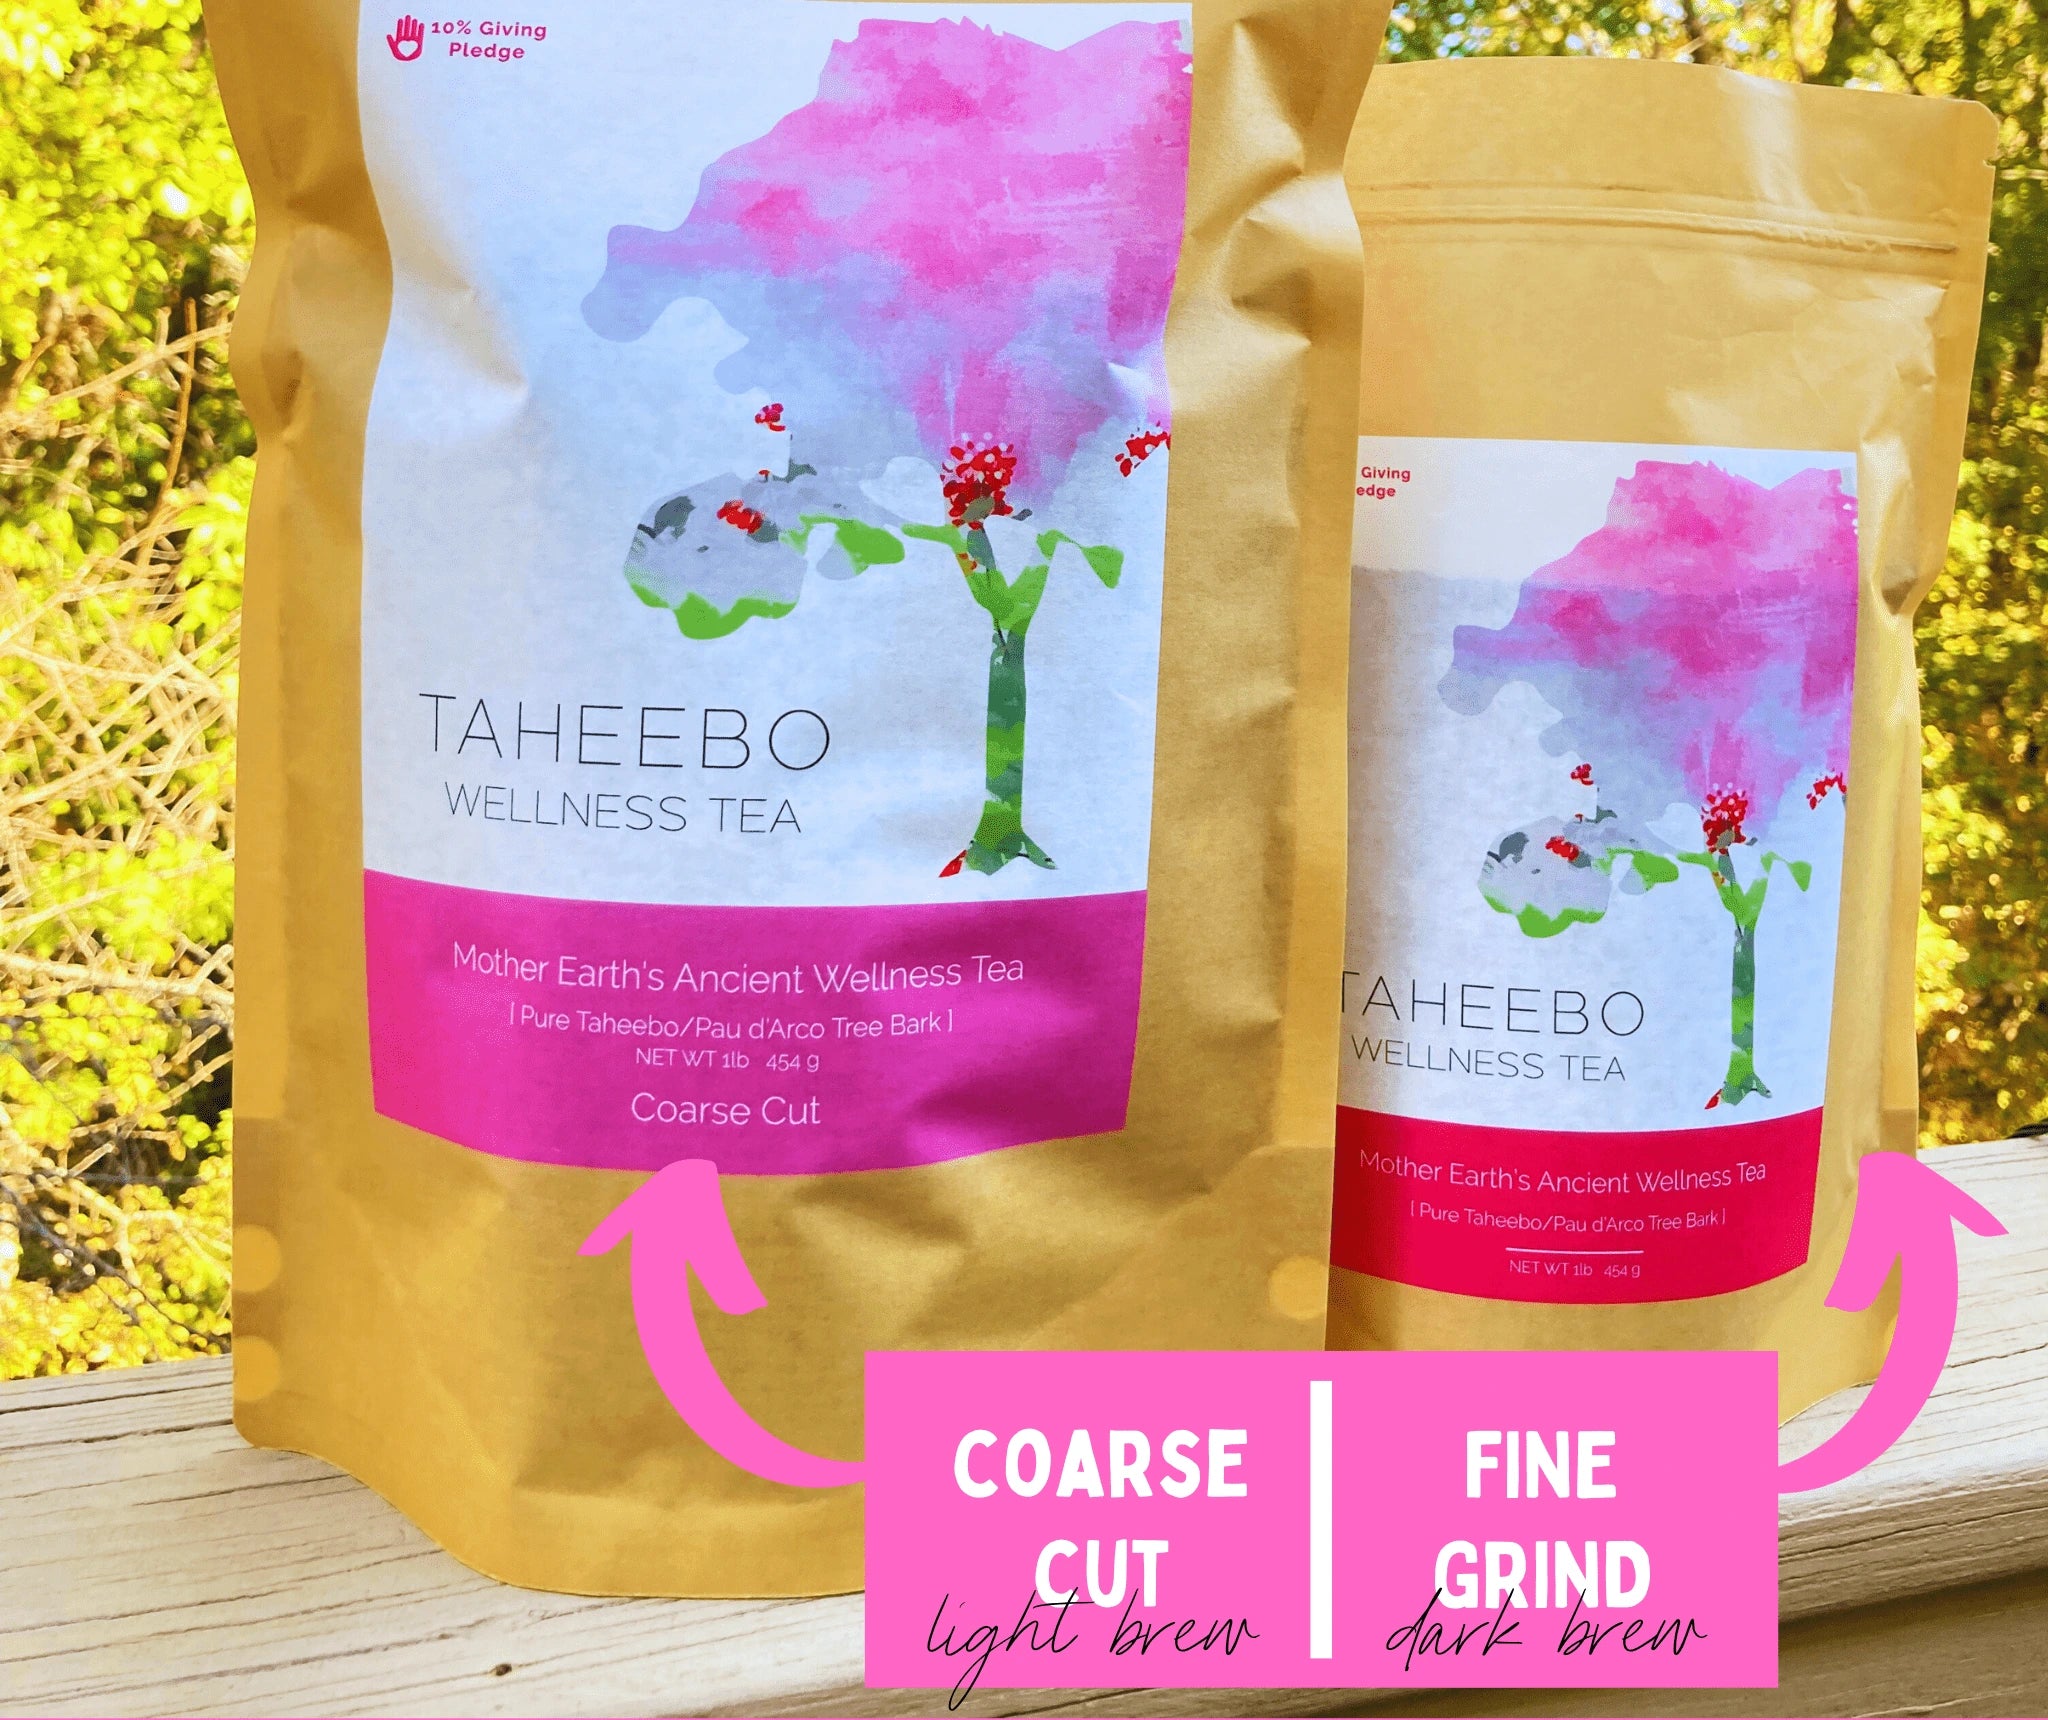 Taheebo Wellness Tea Coarse cut pouches are bigger than the fine grind both contain 1lb of Taheebo Tea bark